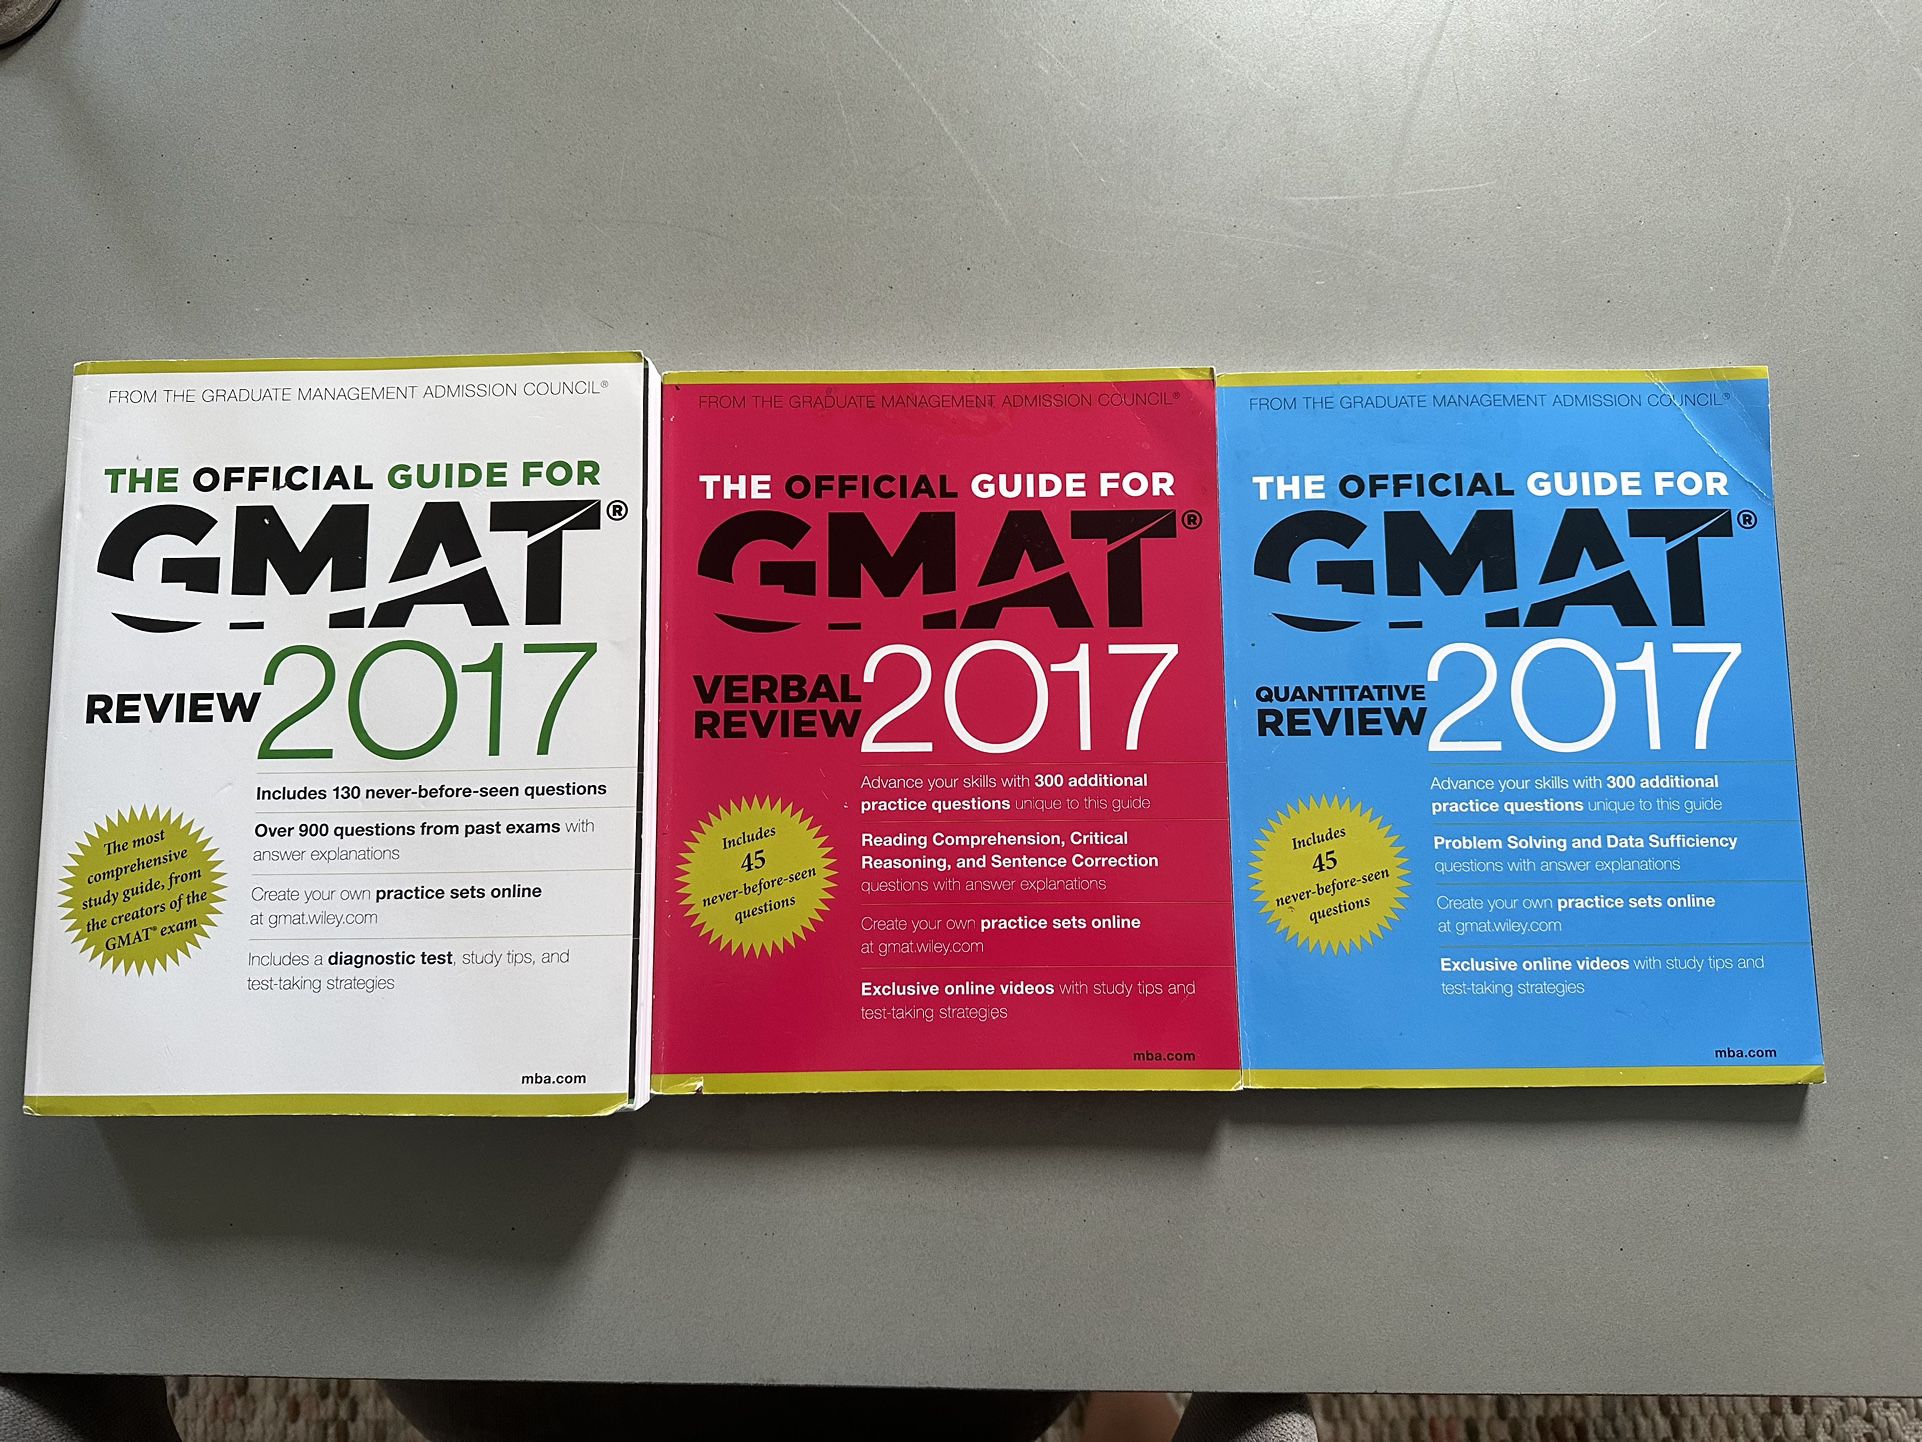 Books　NY　official　York,　Sale　GMAT　New　for　Set　in　of　OfferUp